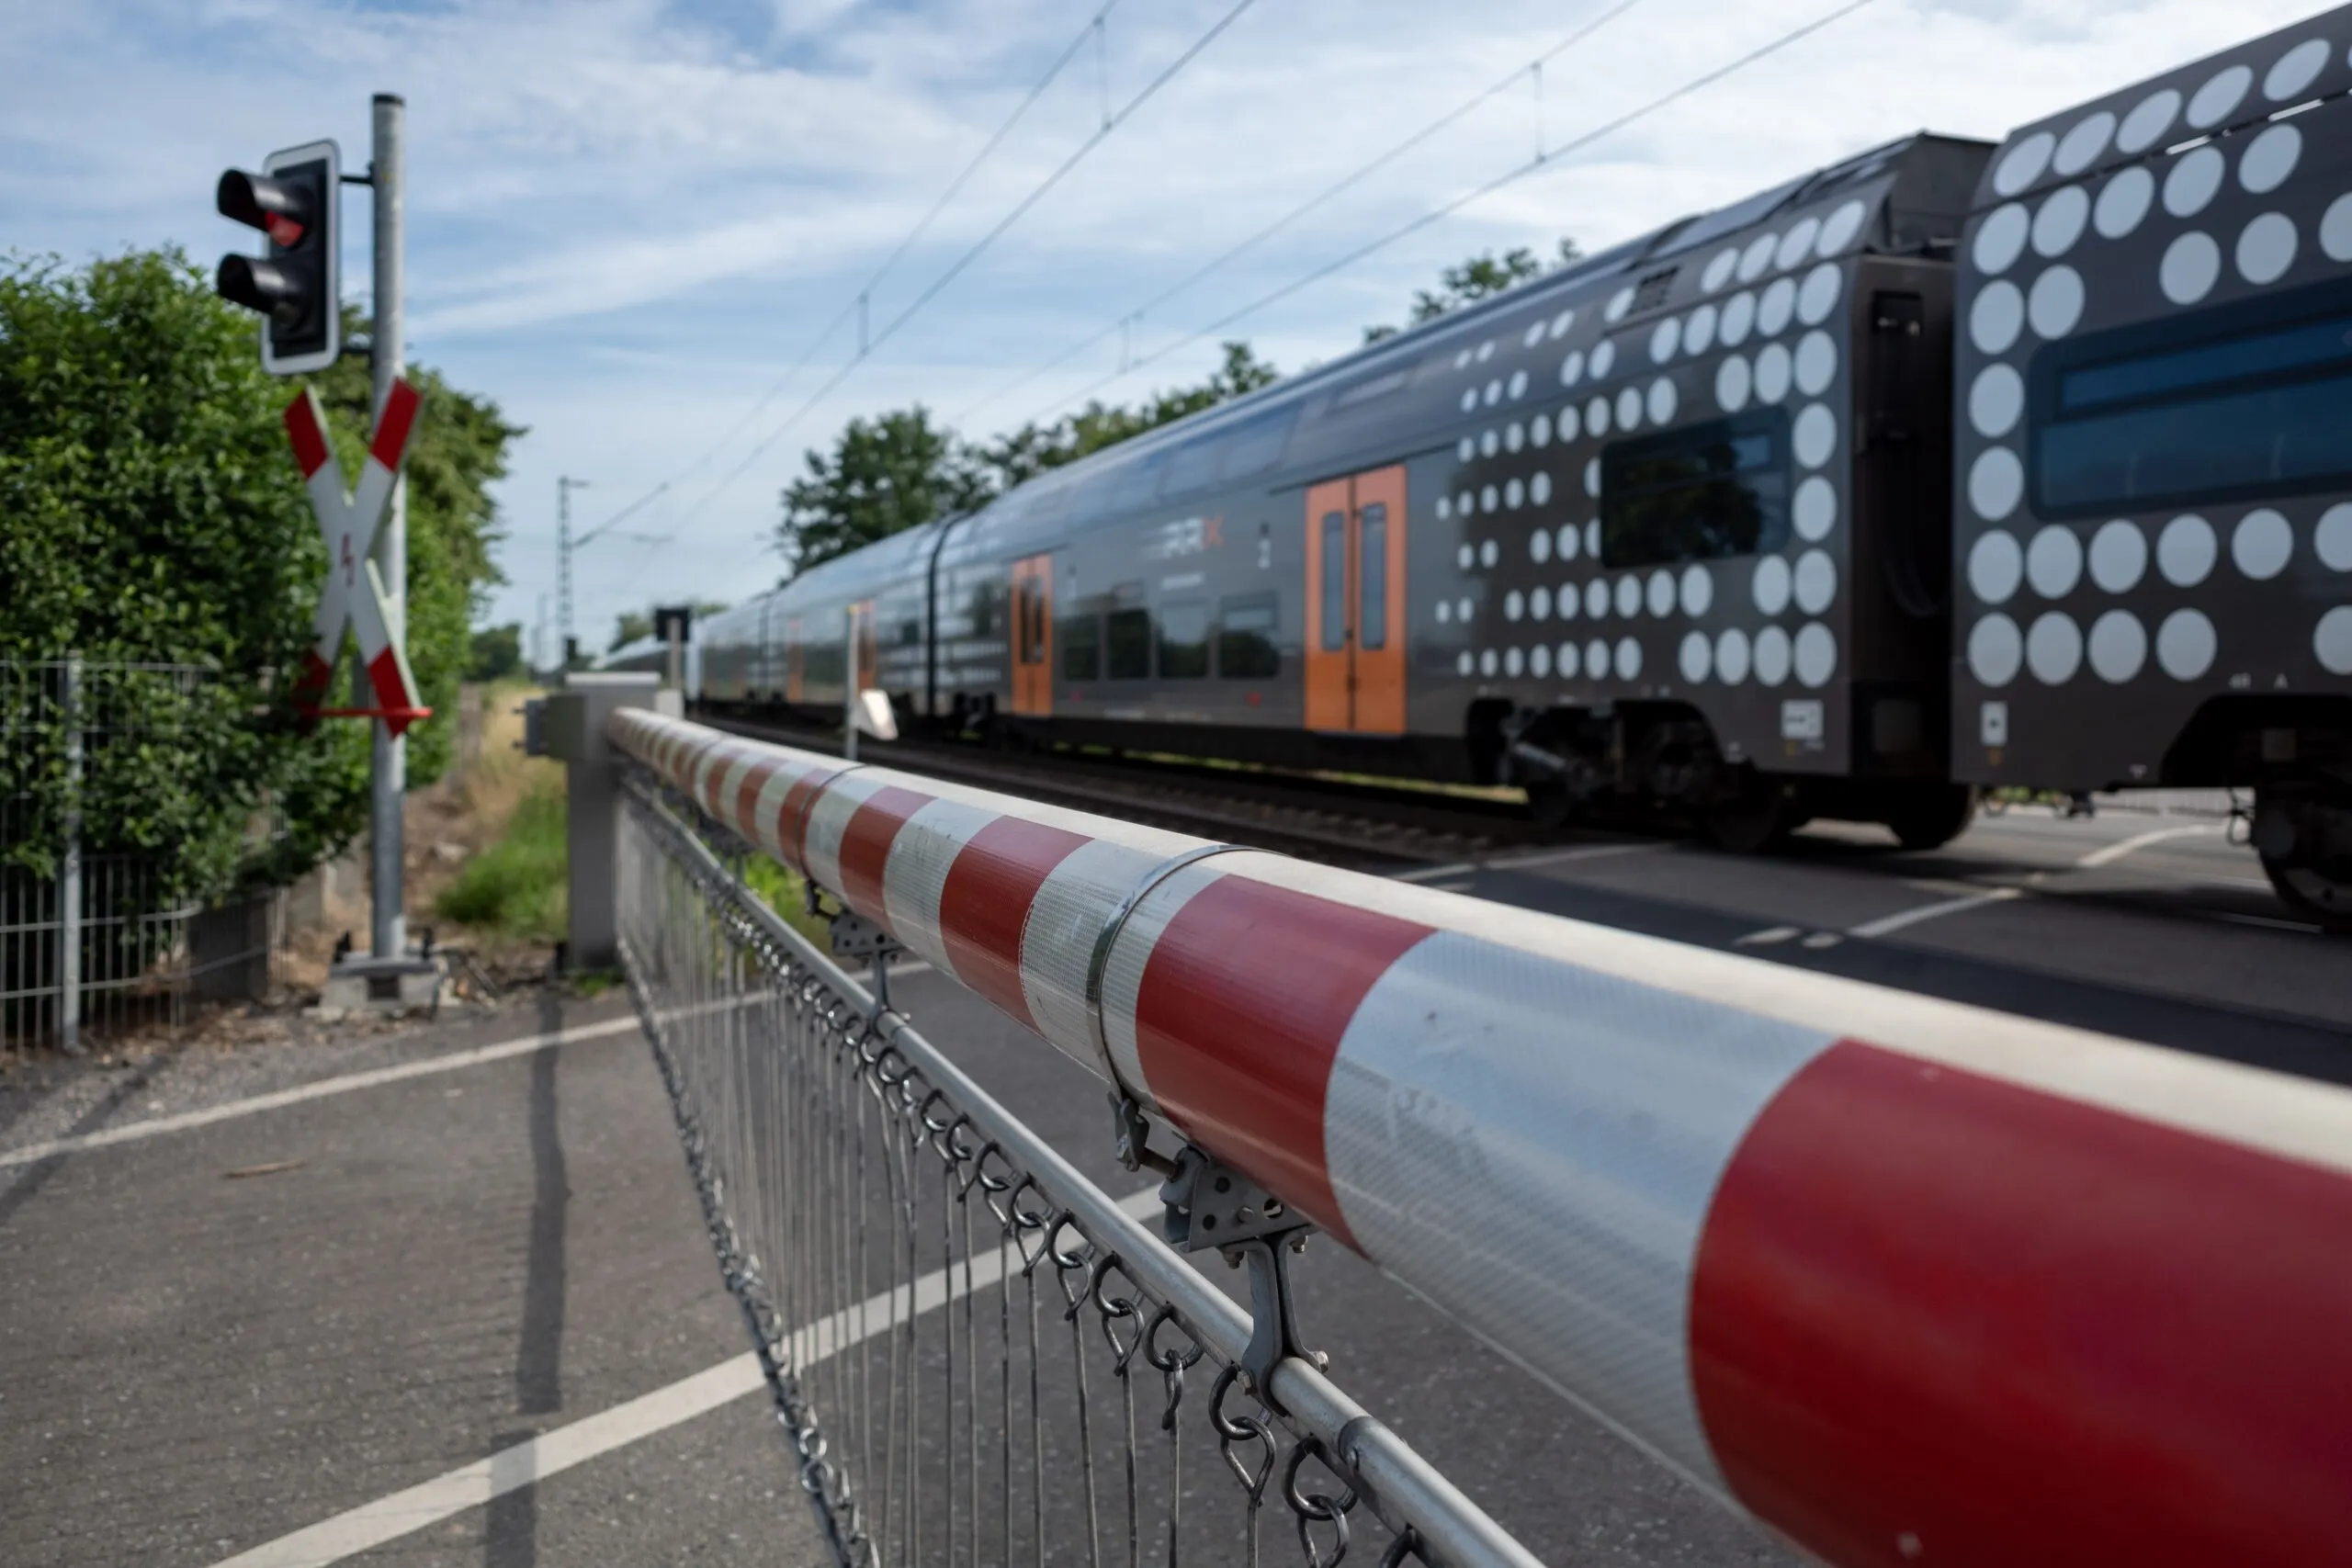 Railway crossing safety arms are down while a train passes through. If you’ve been injured in a train accident, contact us for a strong Wyoming train accident lawyer representative.